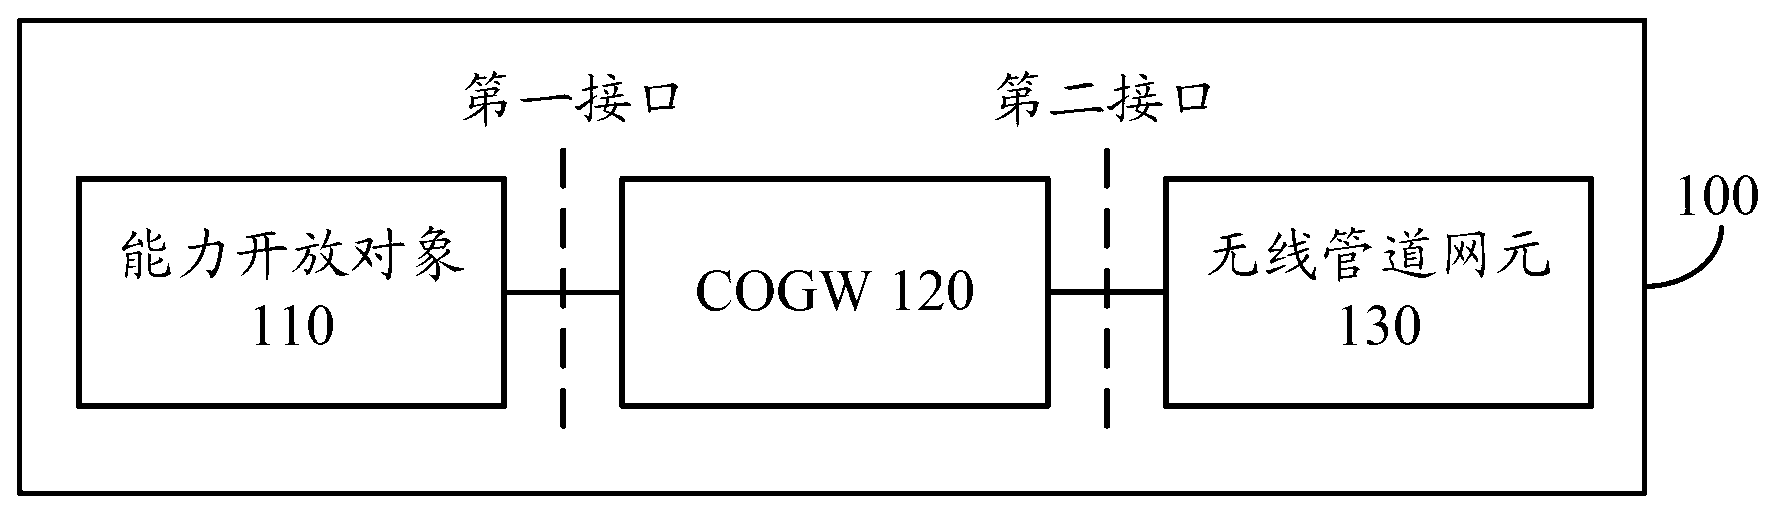 Communication system, capability open gateway and method for opening wireless-pipeline capability